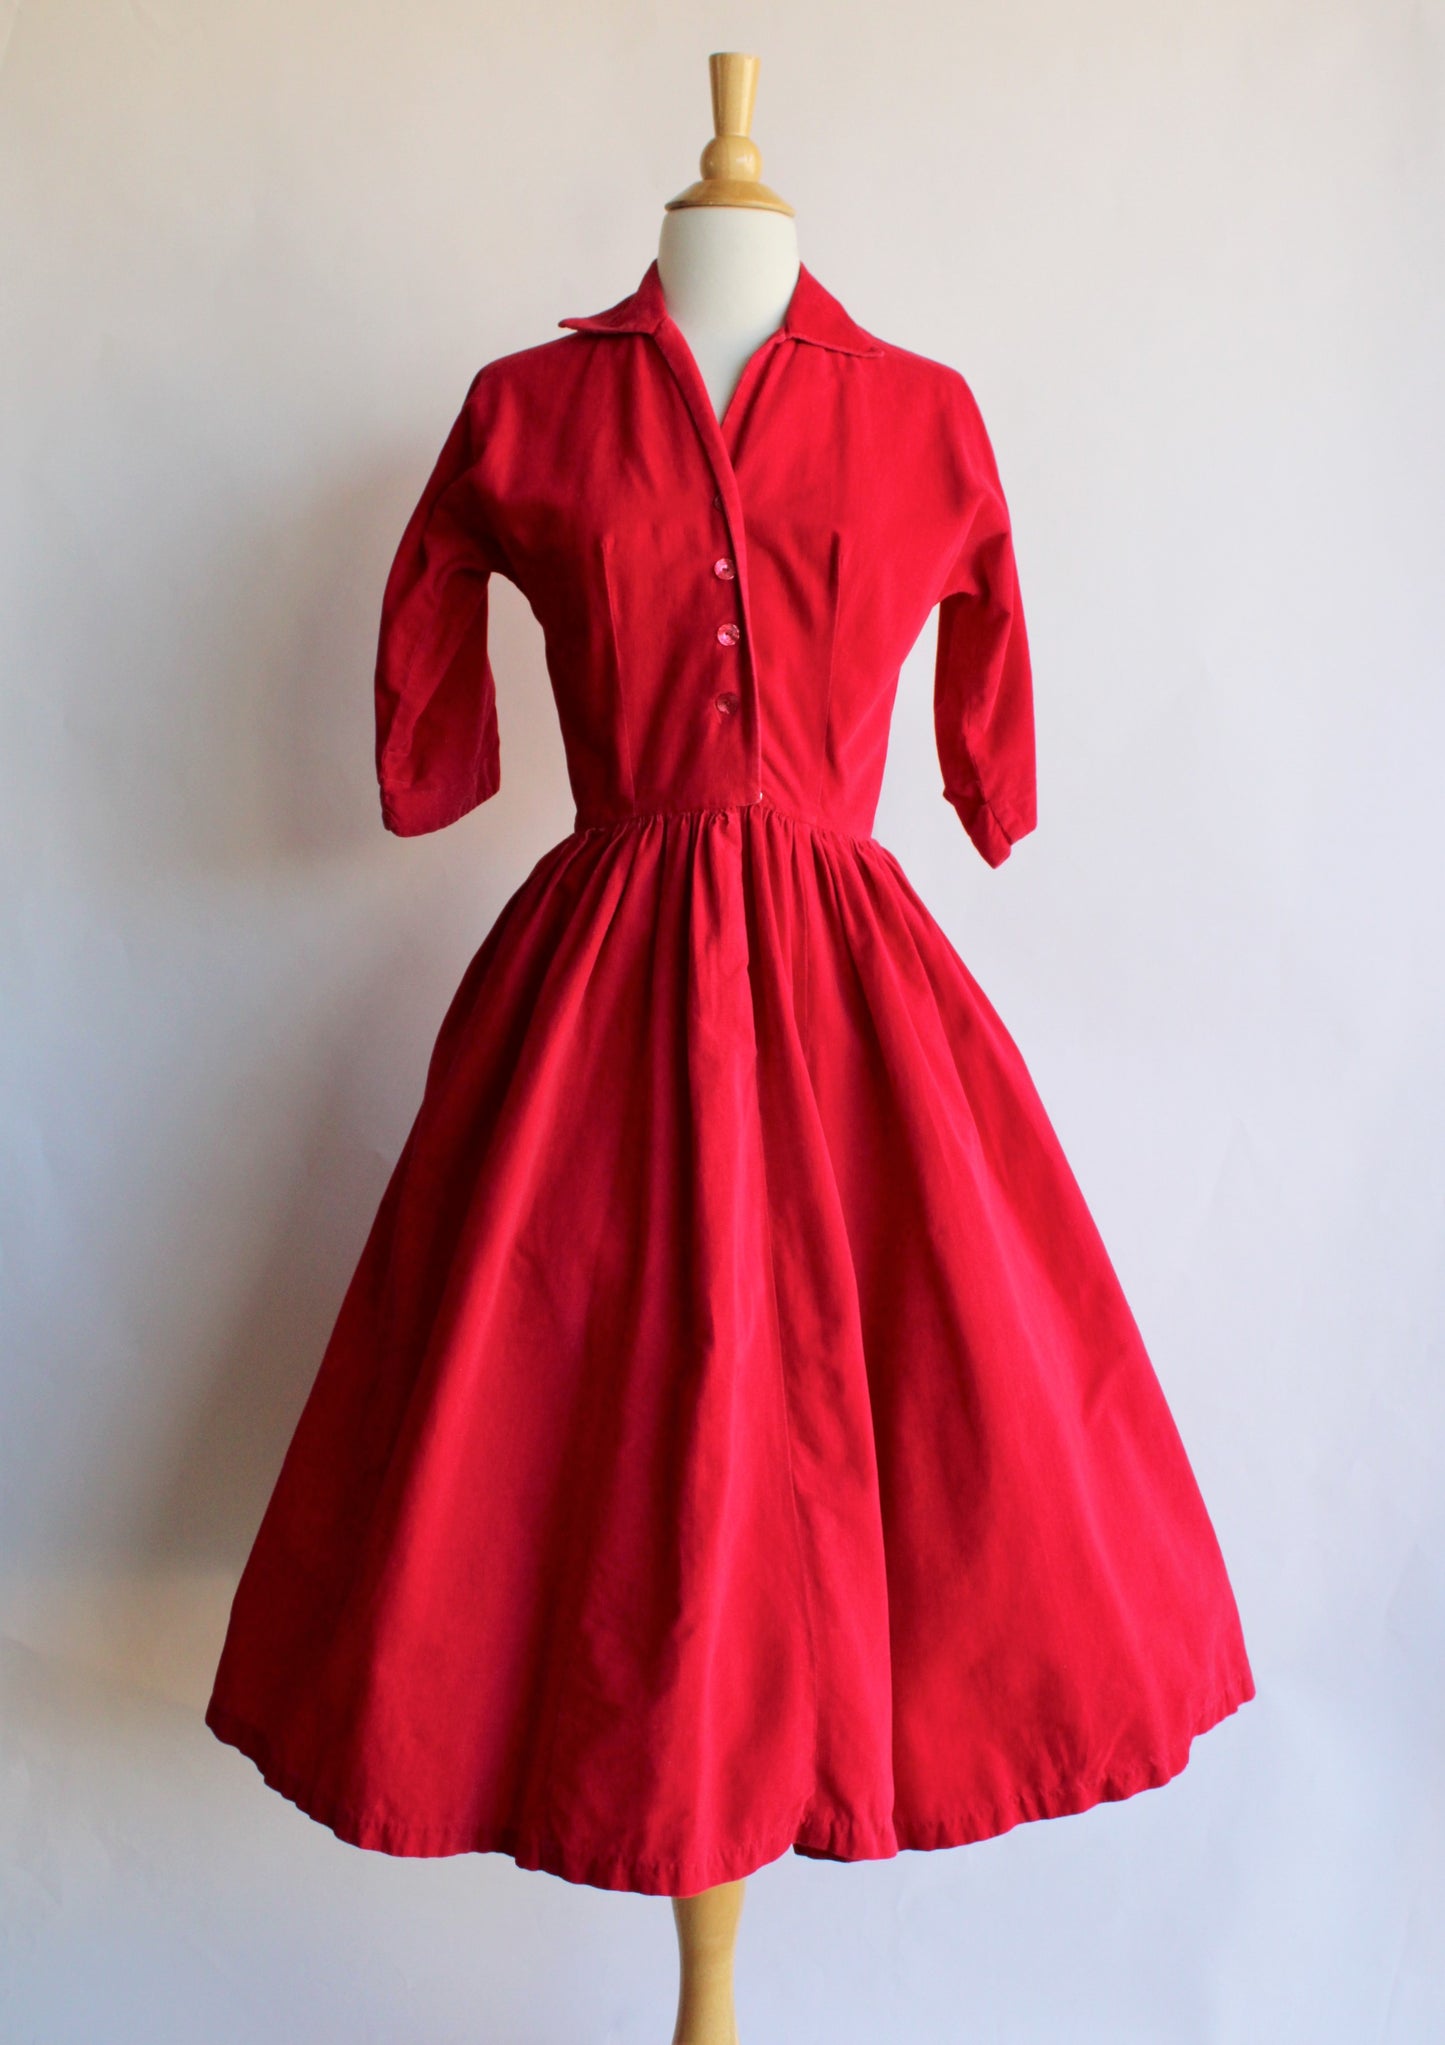 Vintage 1950s Red Corduroy Fit and Flare Dress by Mari Lou